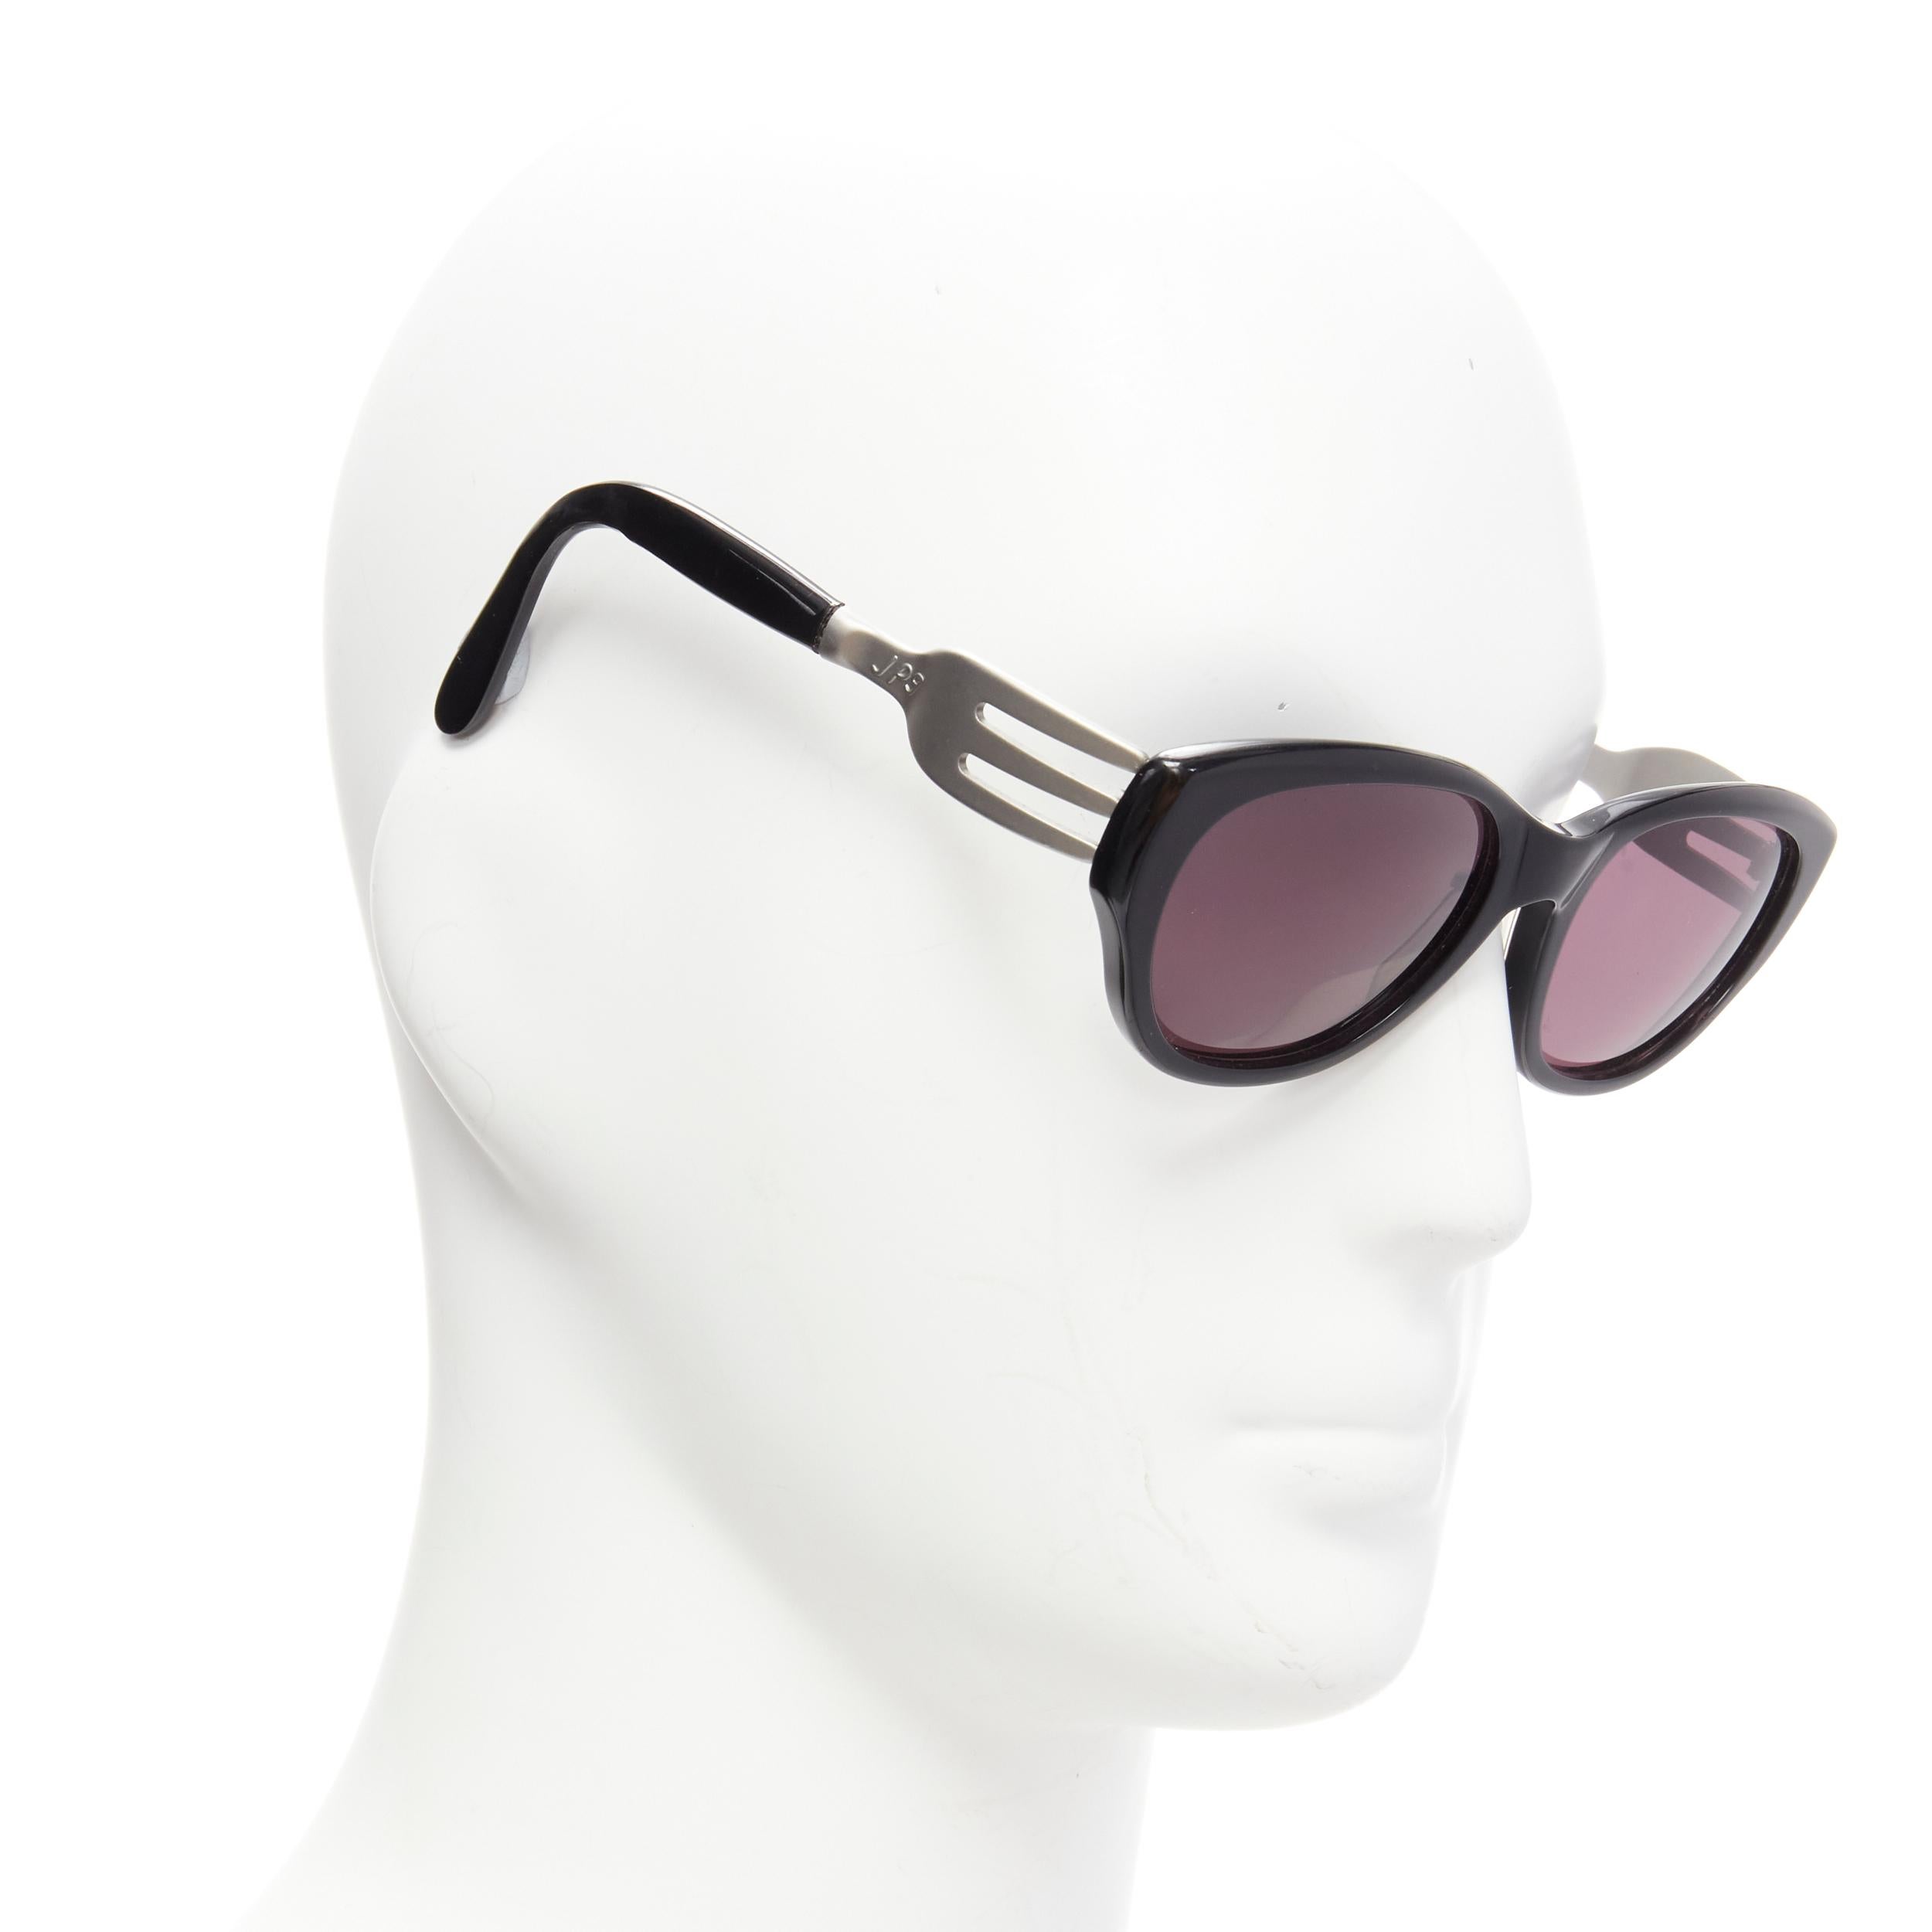 rare JEAN PAUL GAULTIER Vintage 56-3 silver fork temple black acetate sunglasses
Reference: TGAS/D00103
Brand: Jean Paul Gaultier
Designer: Jean Paul Gaultier
Collection: Vintage
Material: Metal, Acetate
Color: Black, Silver
Pattern: Solid
Closure: